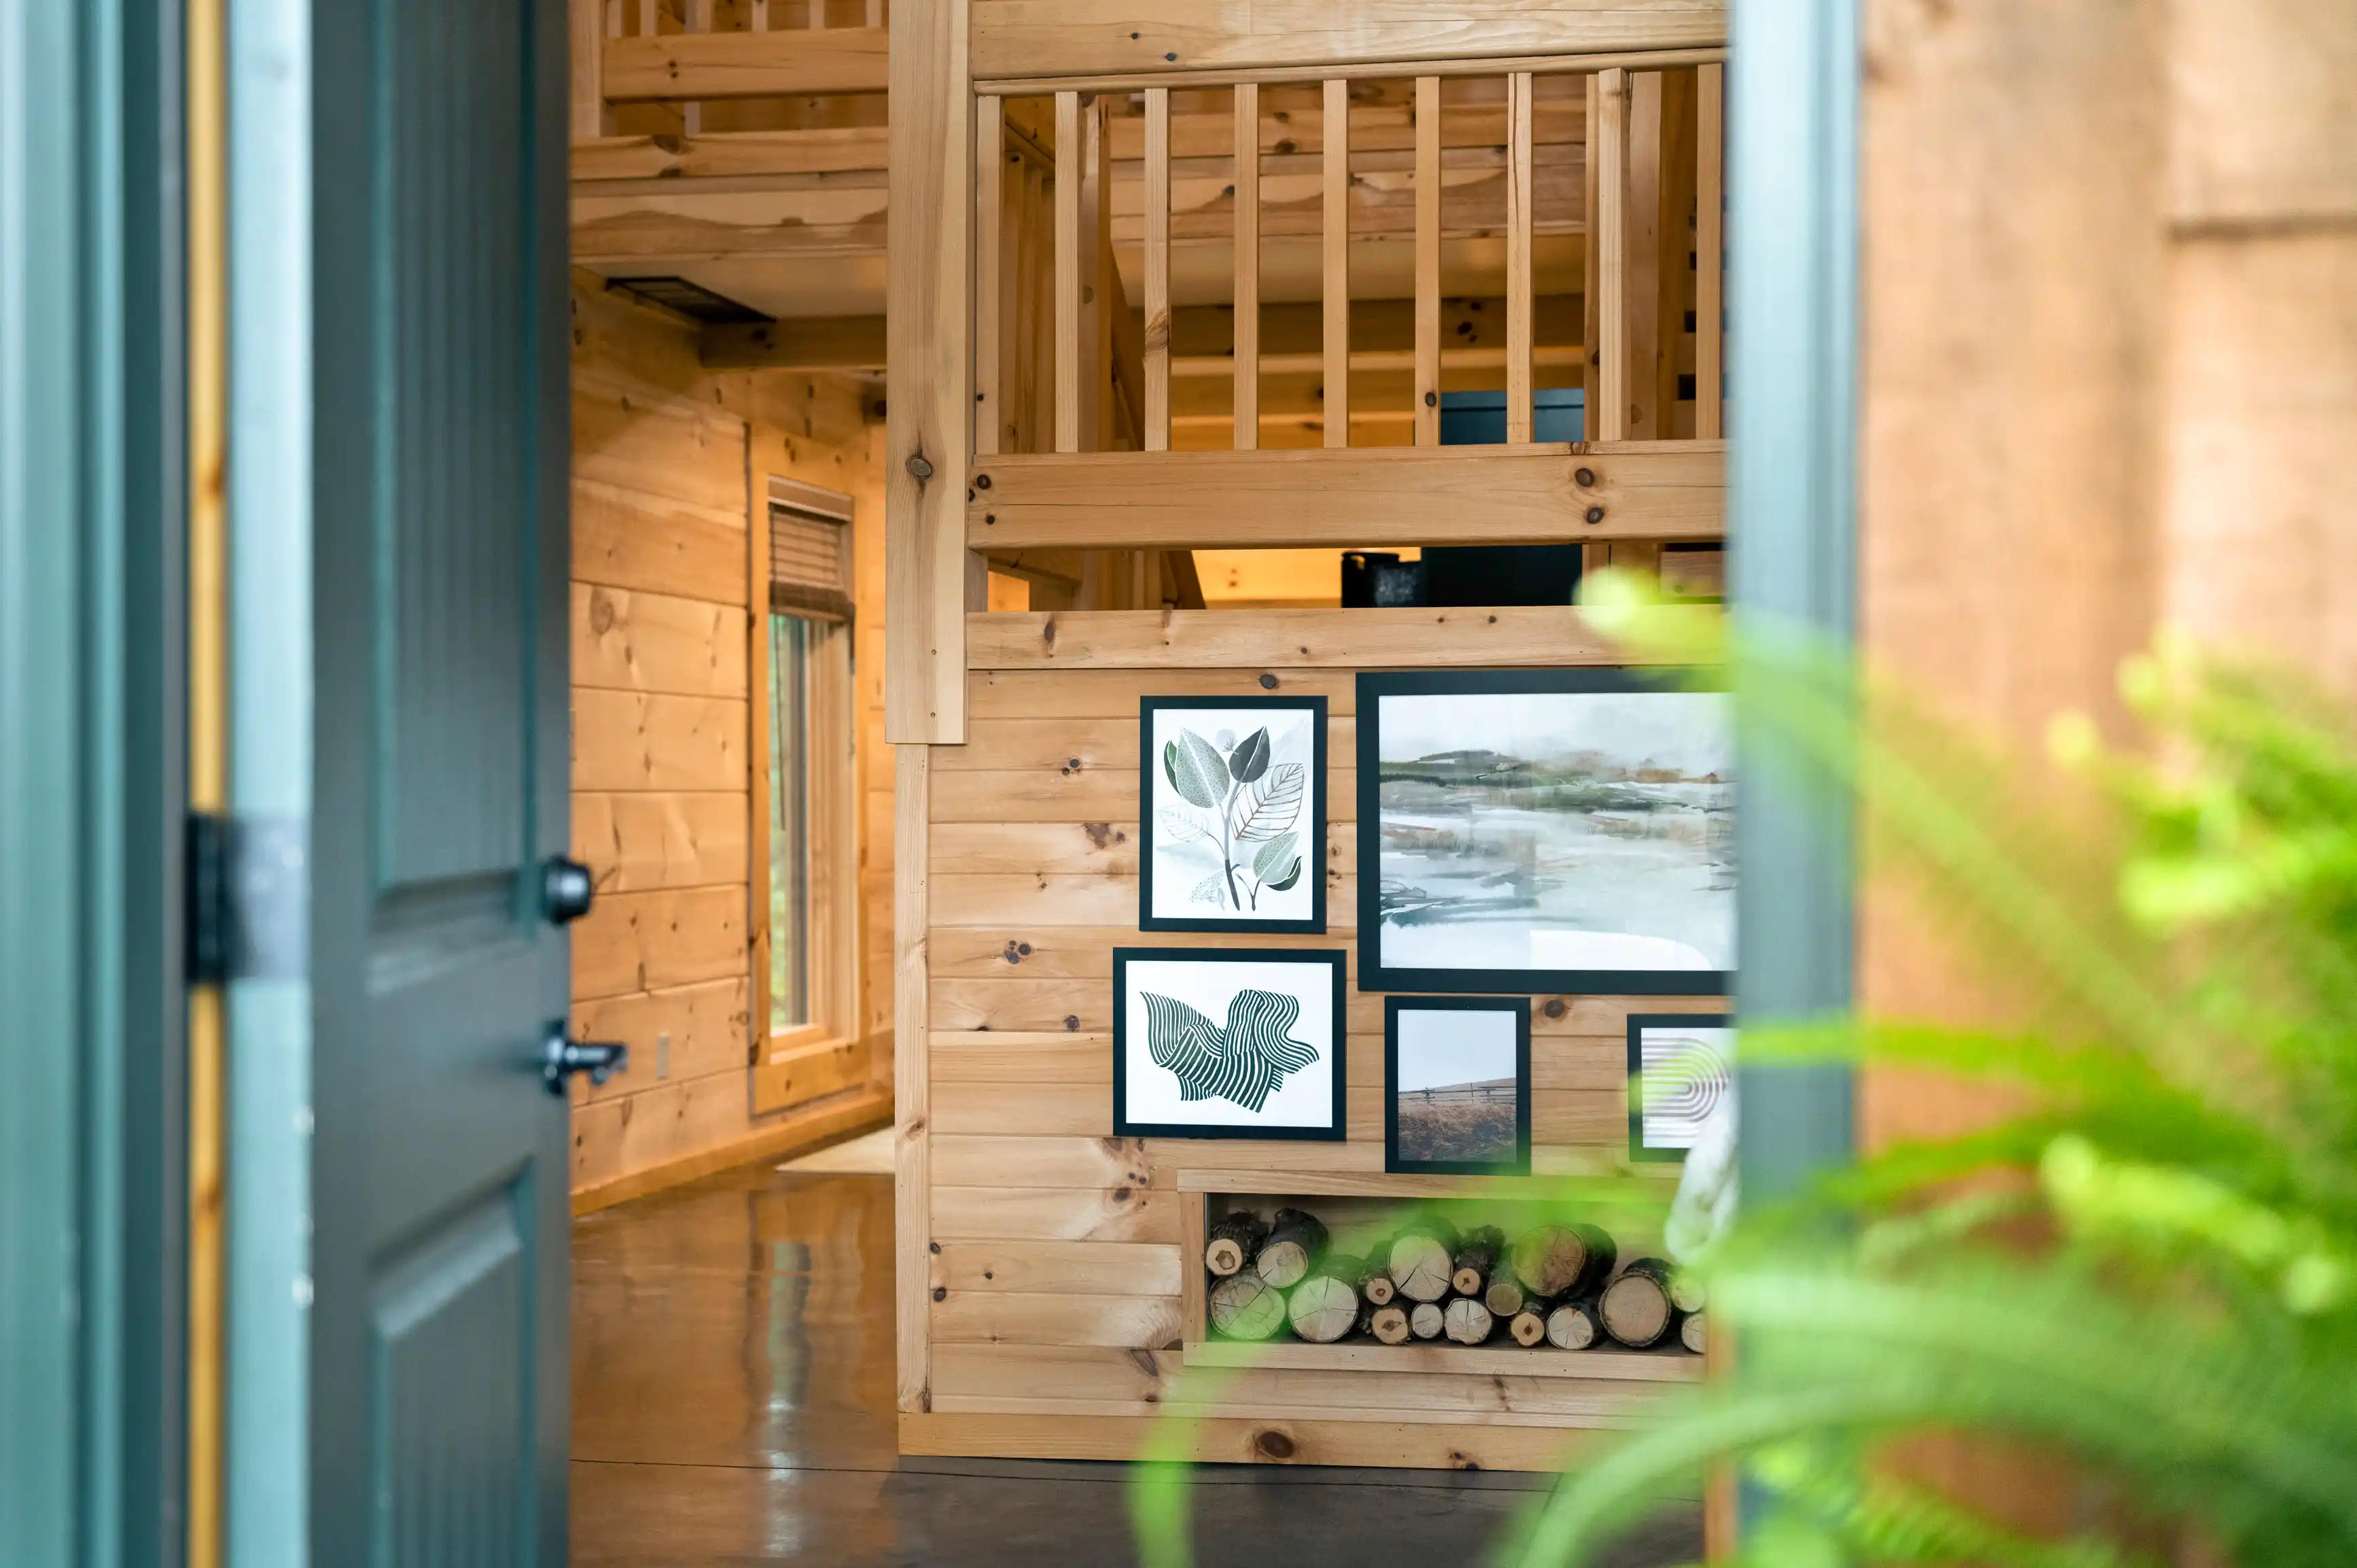 Interior view of a cozy wooden cabin with framed artwork on the wall, visible through an open door, with a focus on natural light and simplicity.